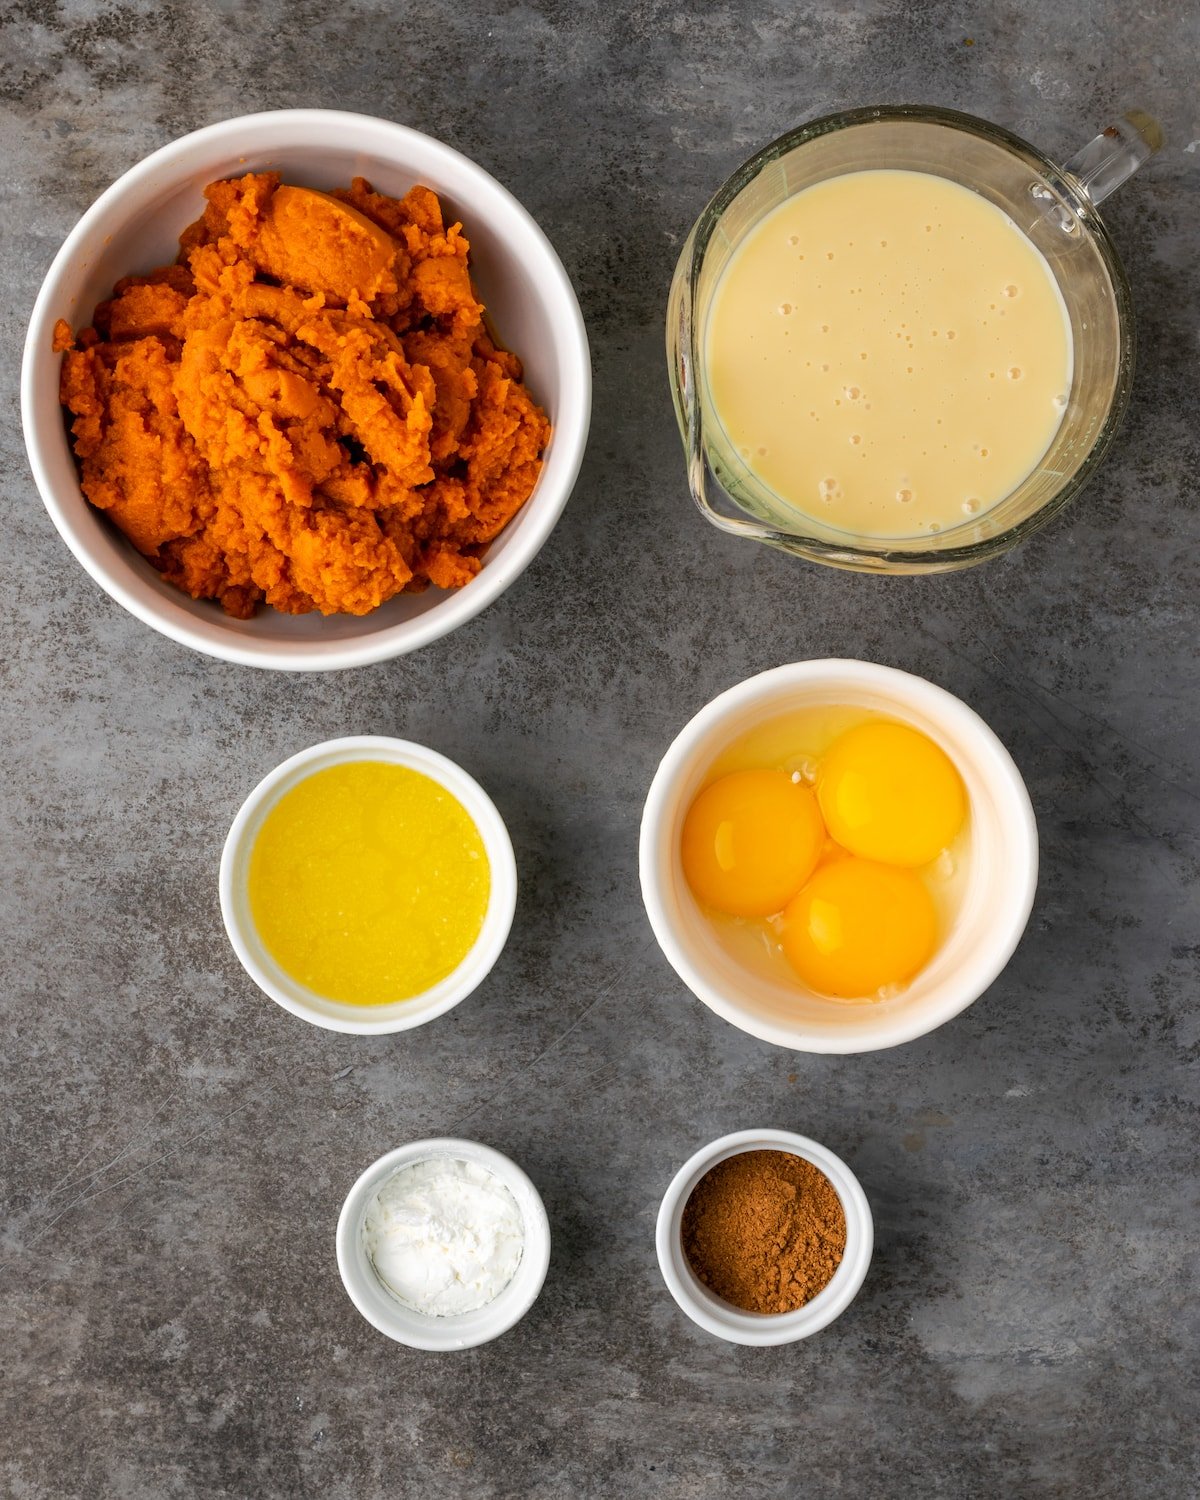 The ingredients for homemade pumpkin pie filling.